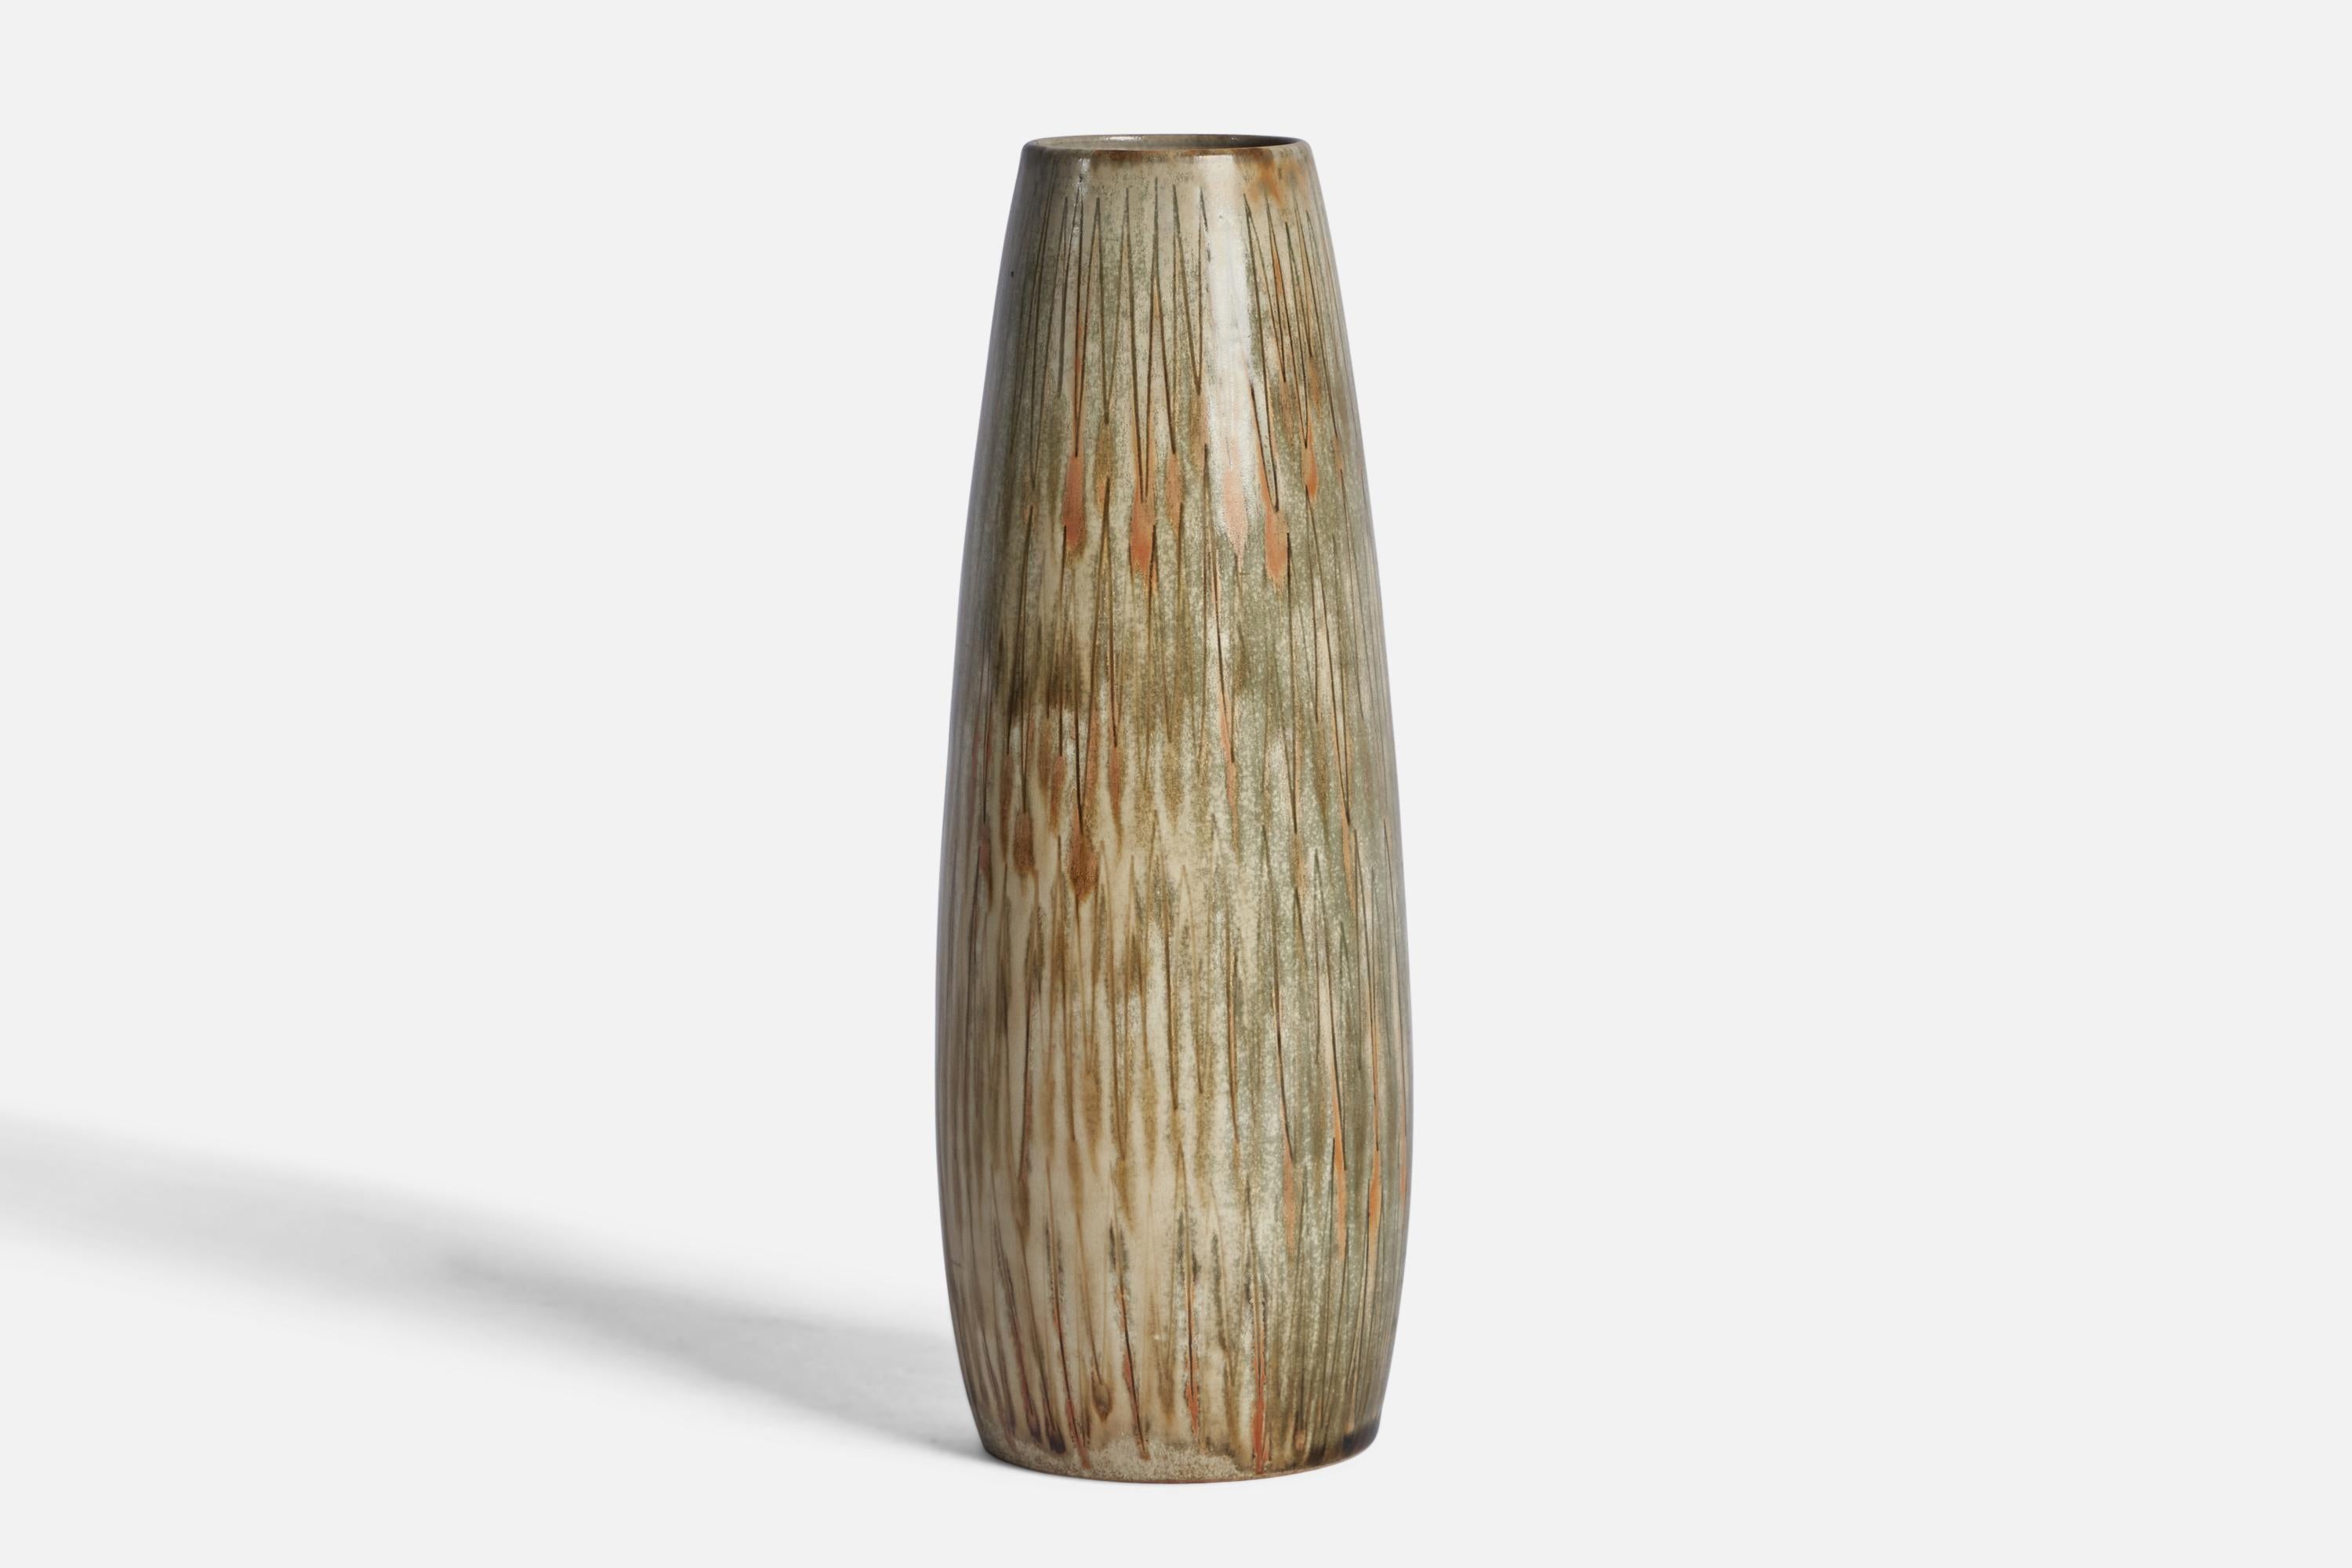 A grey and brown-glazed stoneware vase designed and produced by Andersson & Johansson, Höganäs, Sweden, c. 1940s.